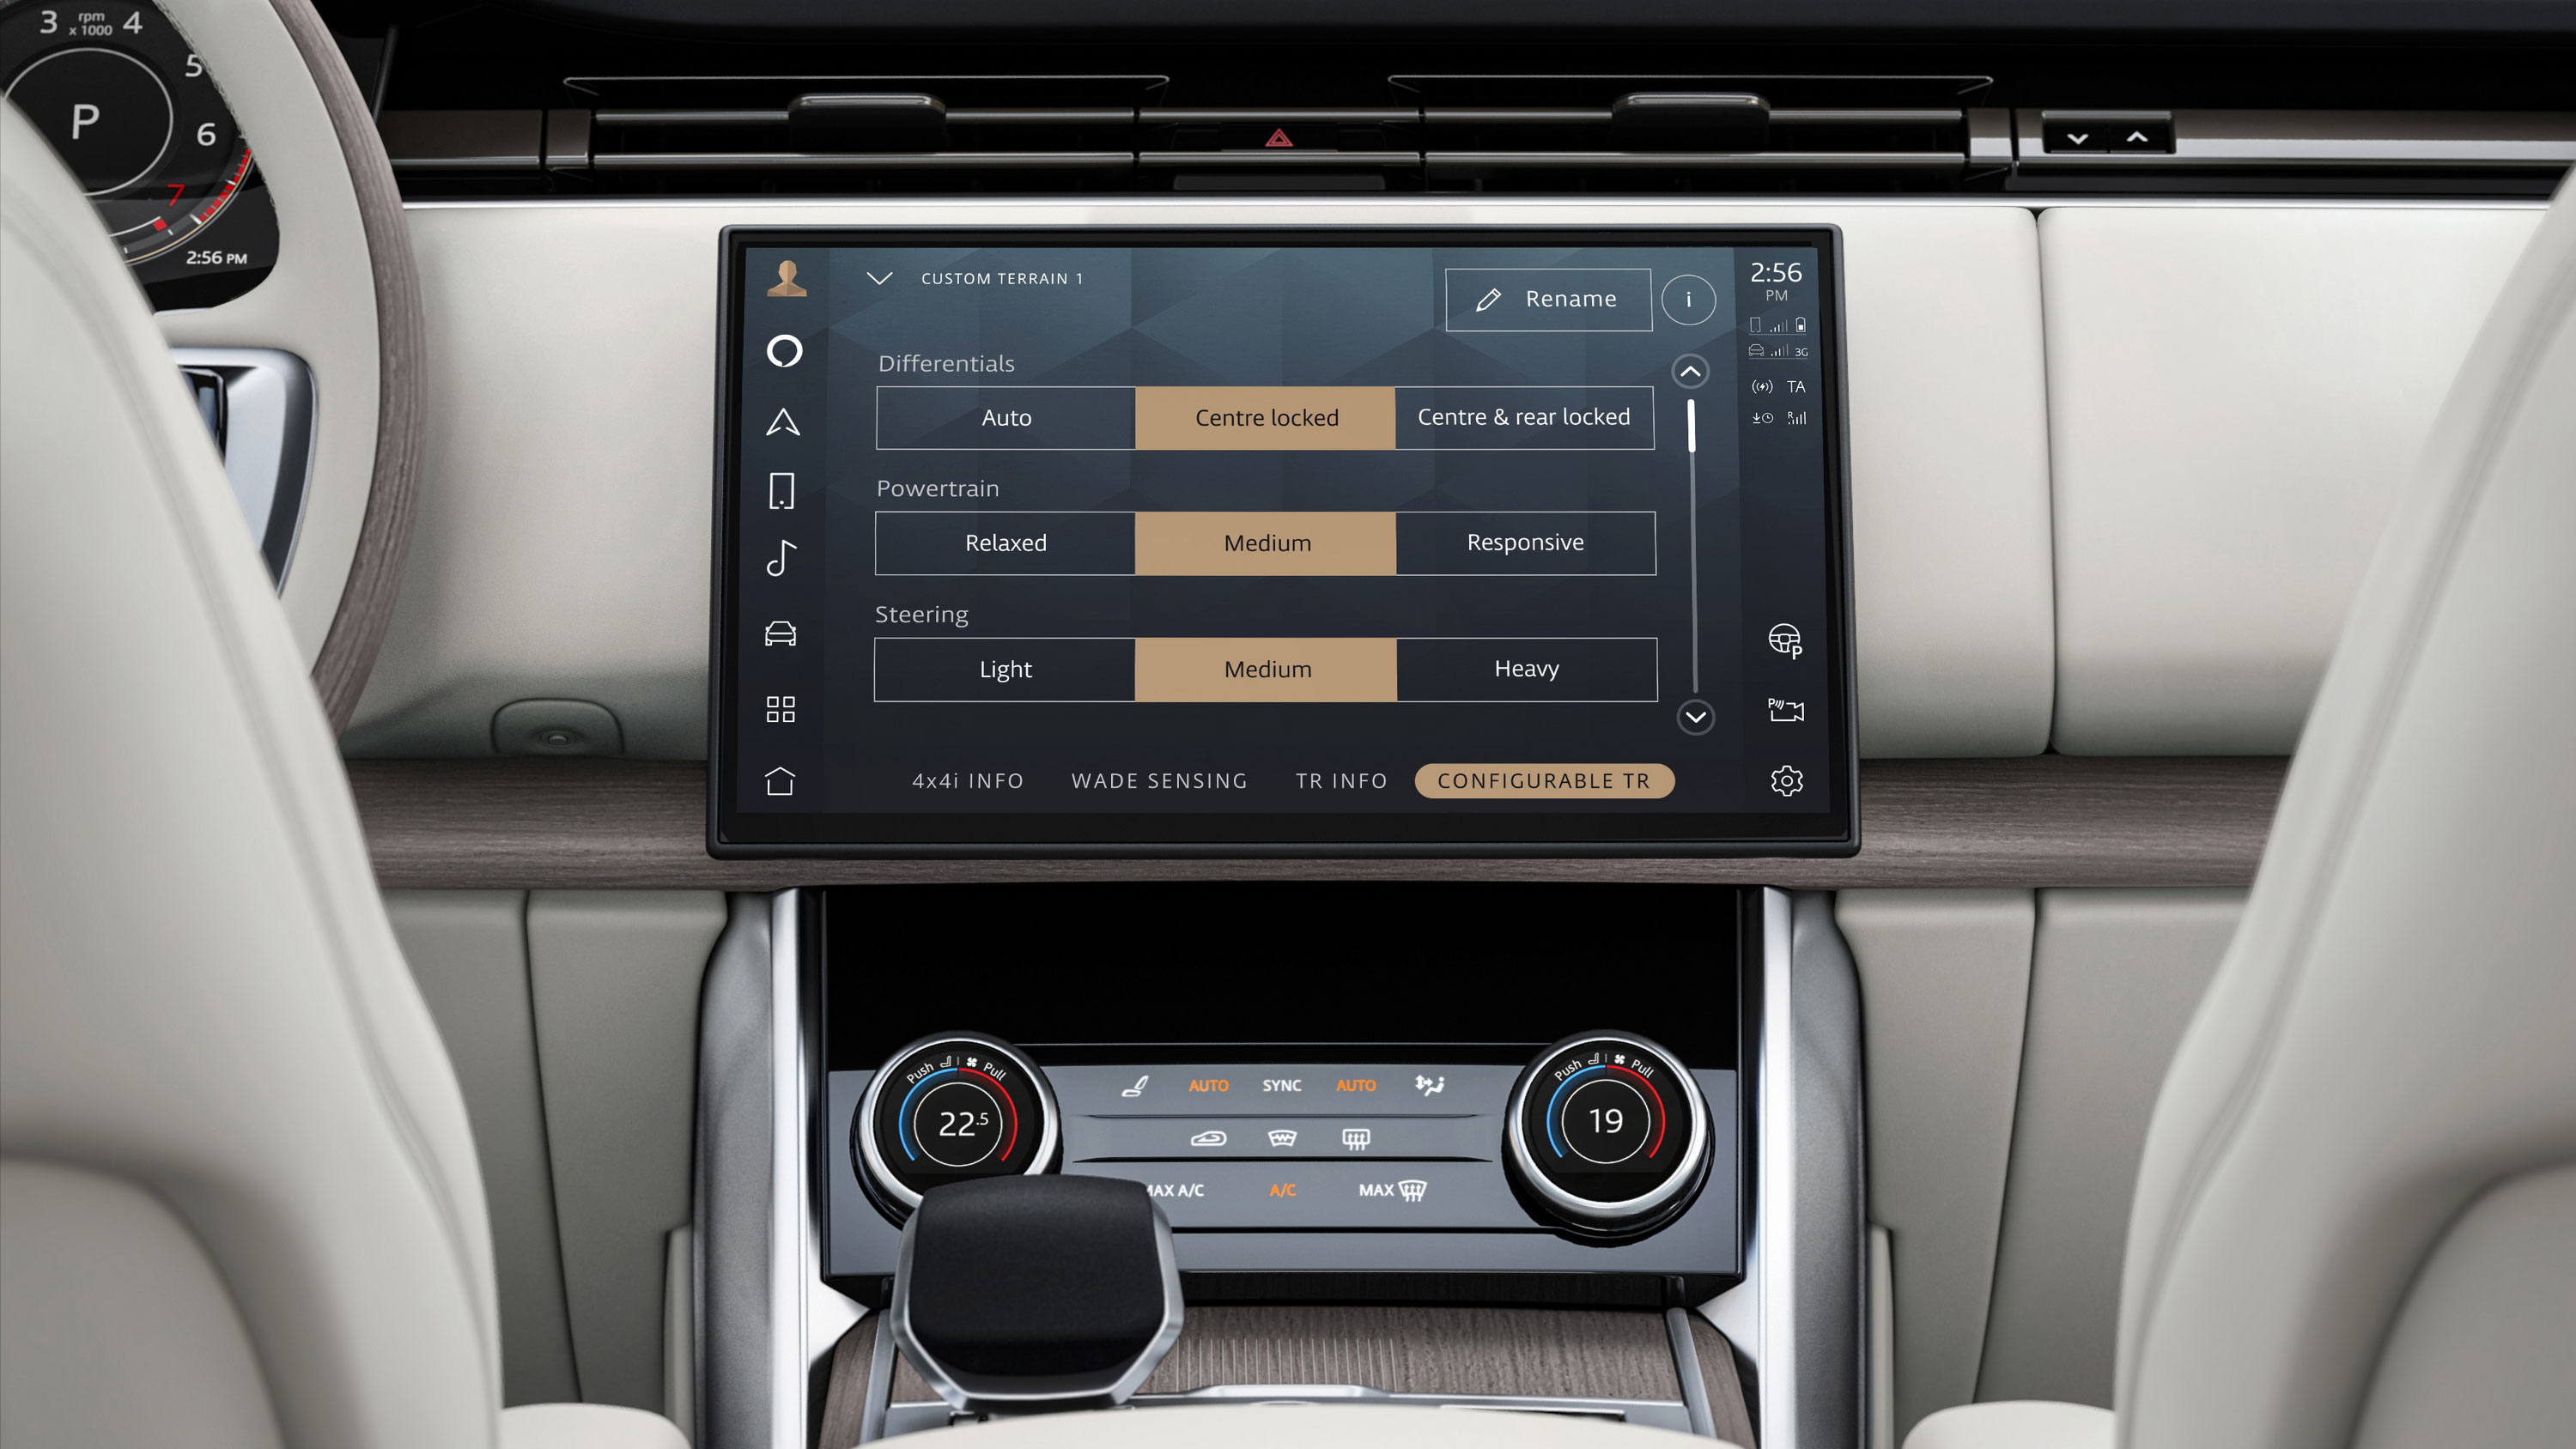 Large, floating infotainment display